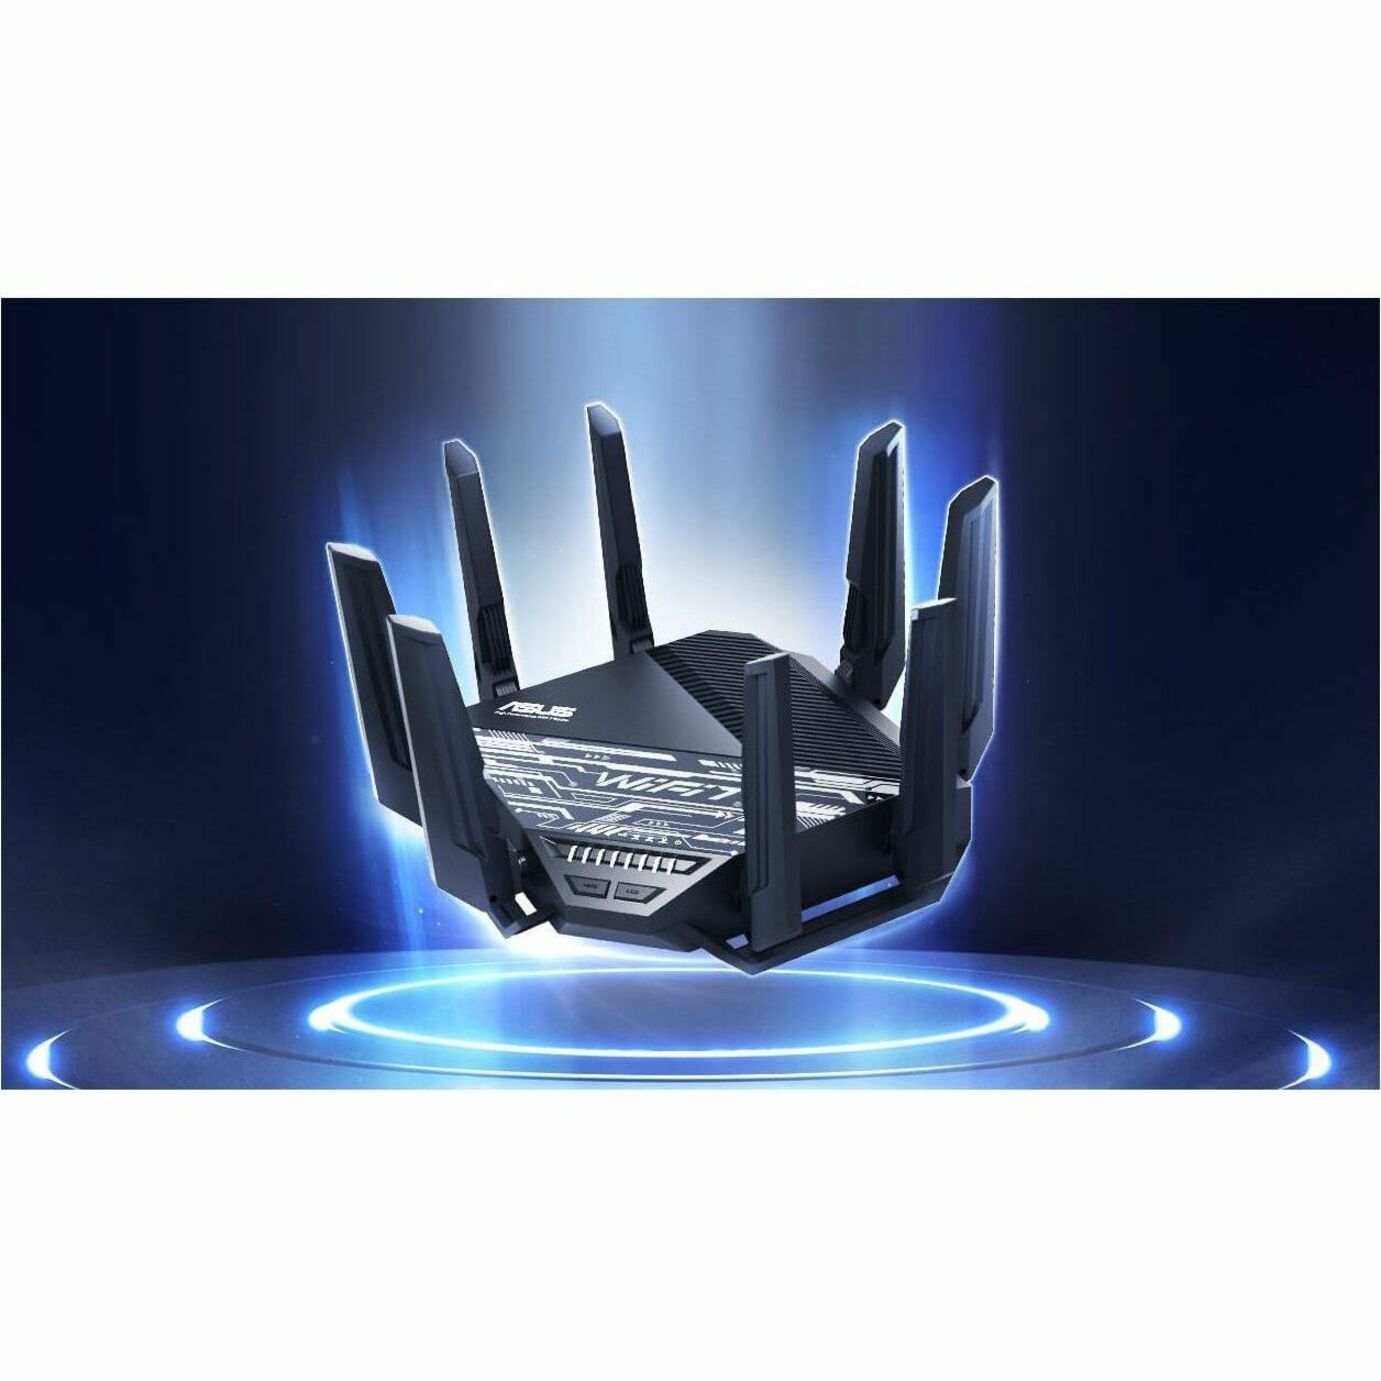 Asus RT-BE96U Wireless Router Wi-Fi 7 Ethernet Tri Band 2.28 GB/s Transmission Speed 